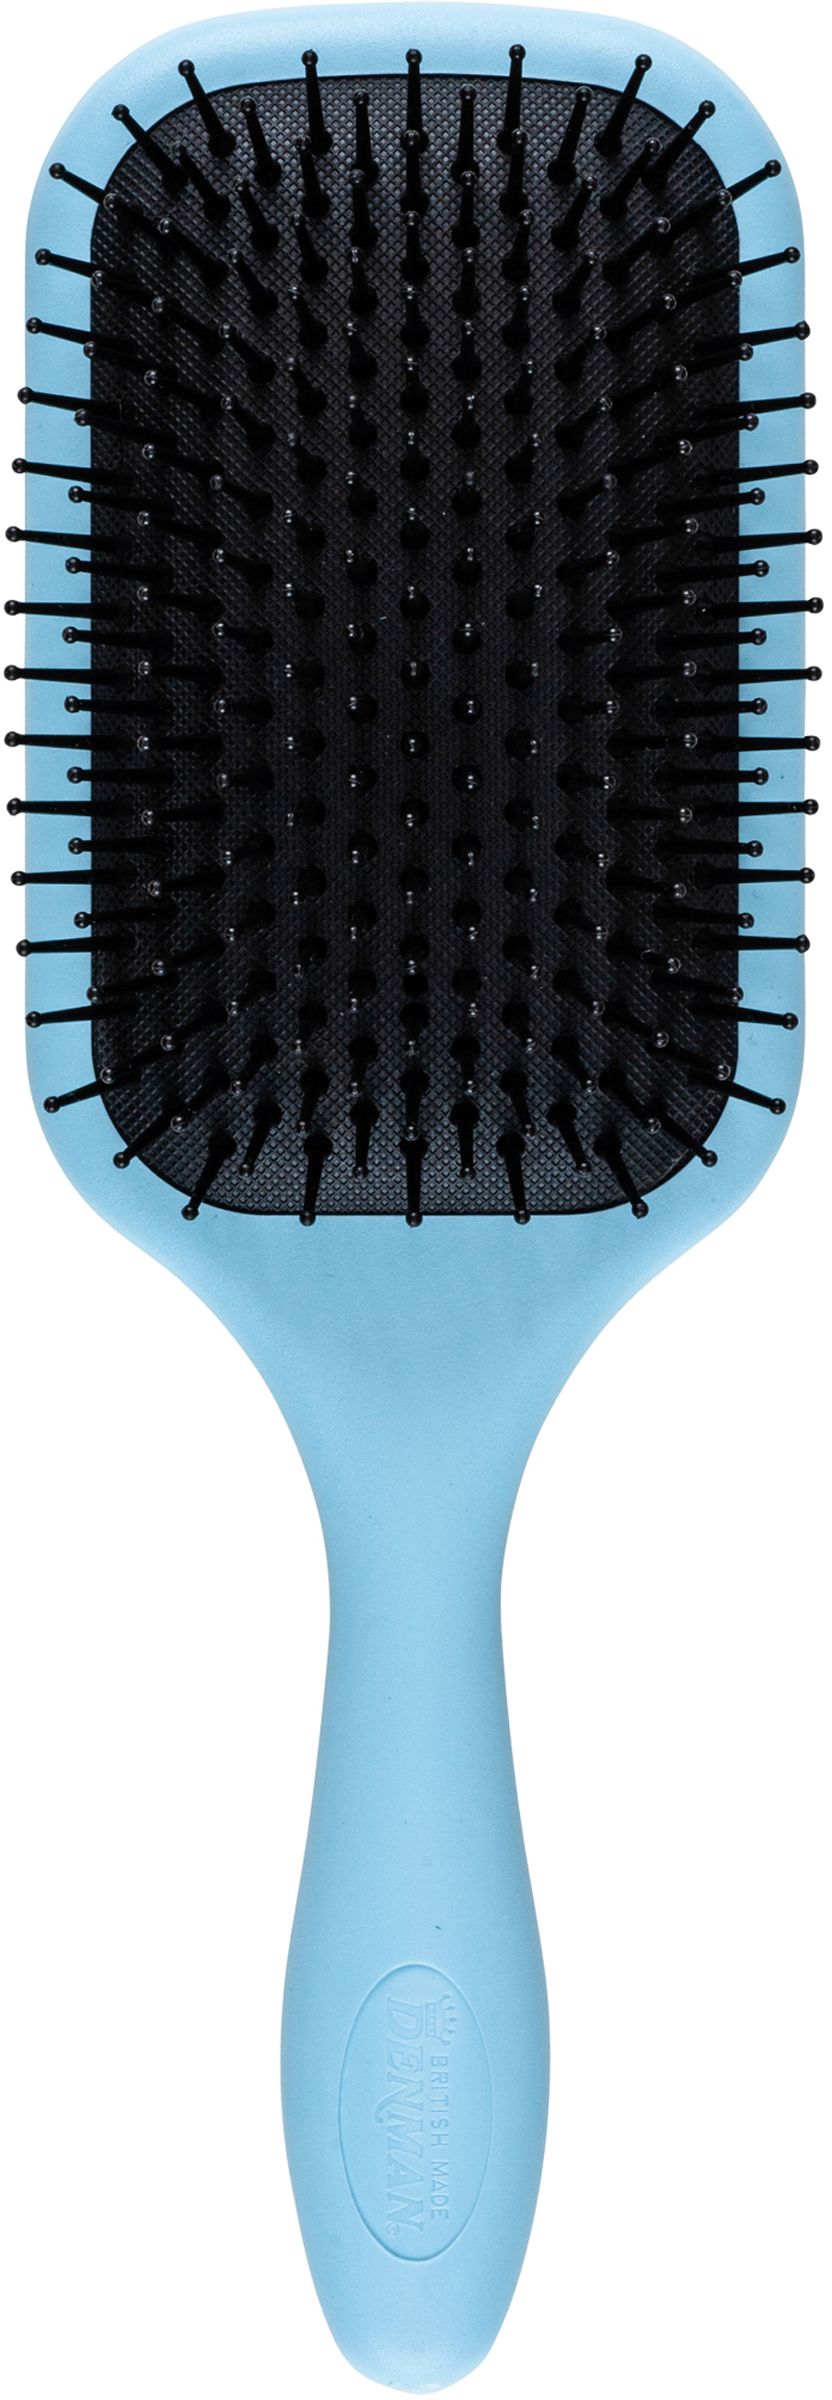 Denman D83 The Paddle Brush Nordic Ice 1 st